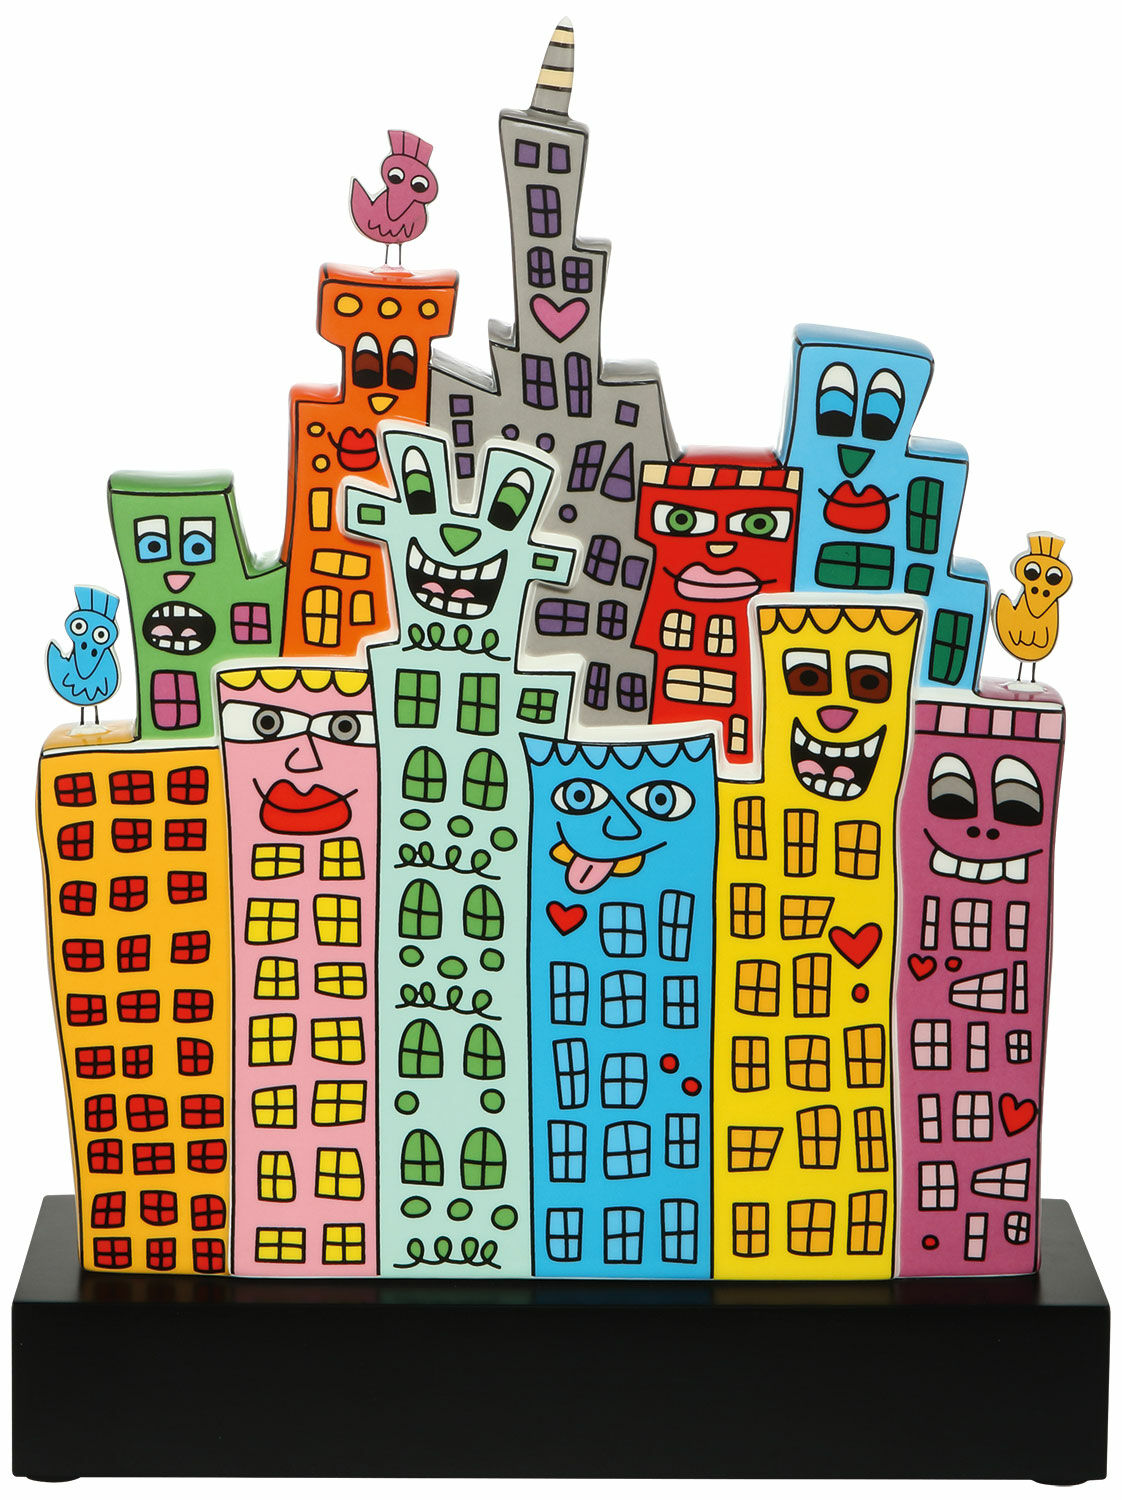 Porcelain object "Summer in the City" by James Rizzi